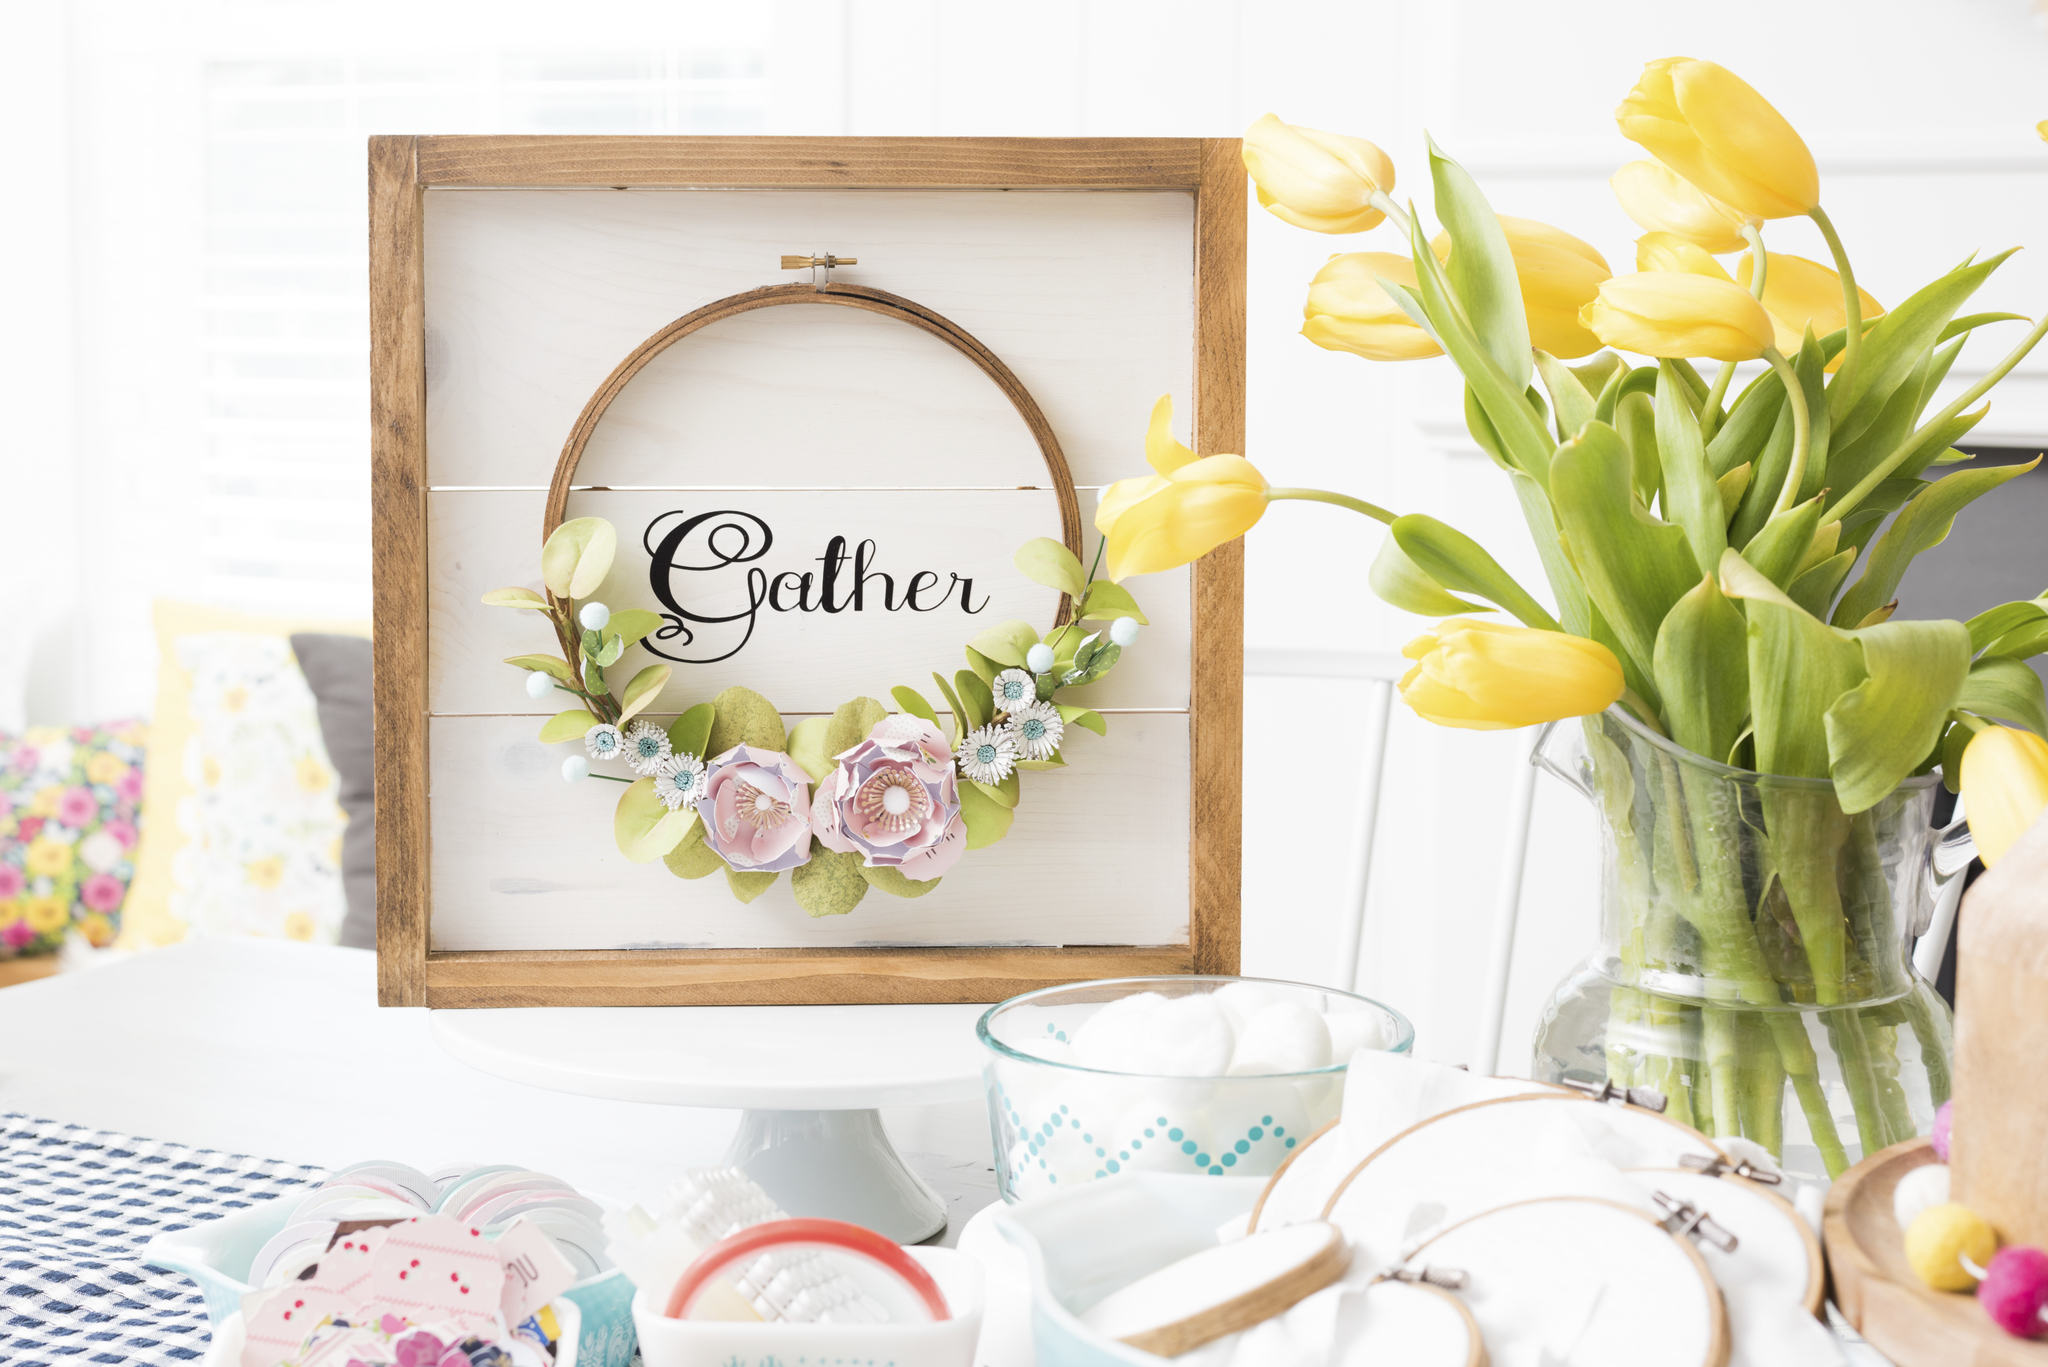 Make an Autumn Framed Embroidery Hoop Gather Wall Hanging. Create a beautiful Fall Wall Hanging with a frame, an embroidery hoop, vinyl letters and paper flowers. Hang it on your front door or a wall to welcome Autumn to your home! 